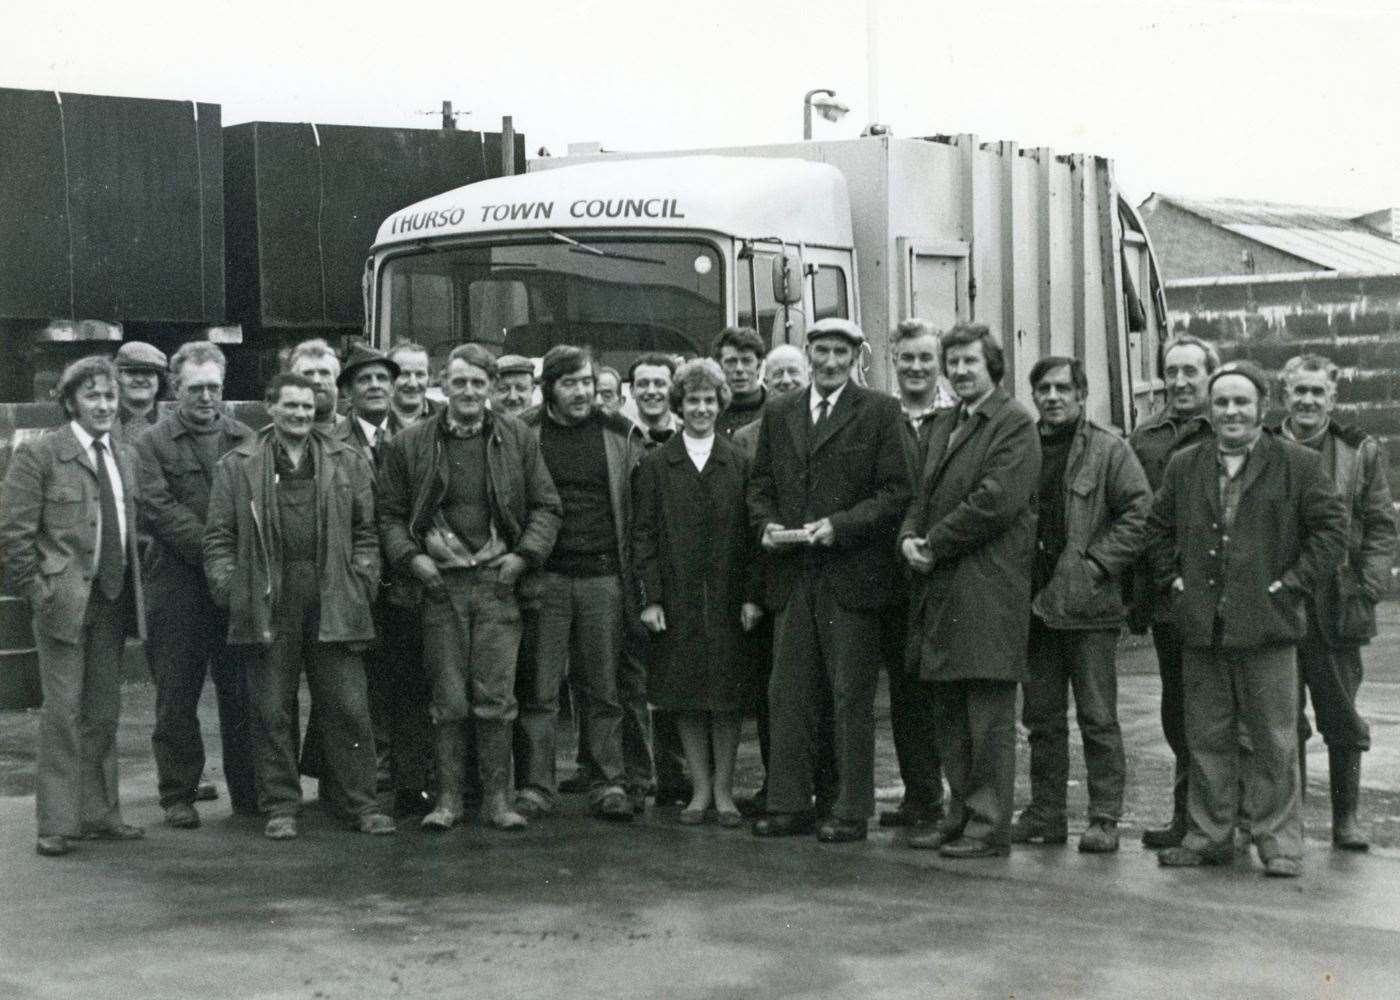 A photograph taken on the occasion of Jock Smith’s retirement featuring the Thurso binmen plus other council staff.